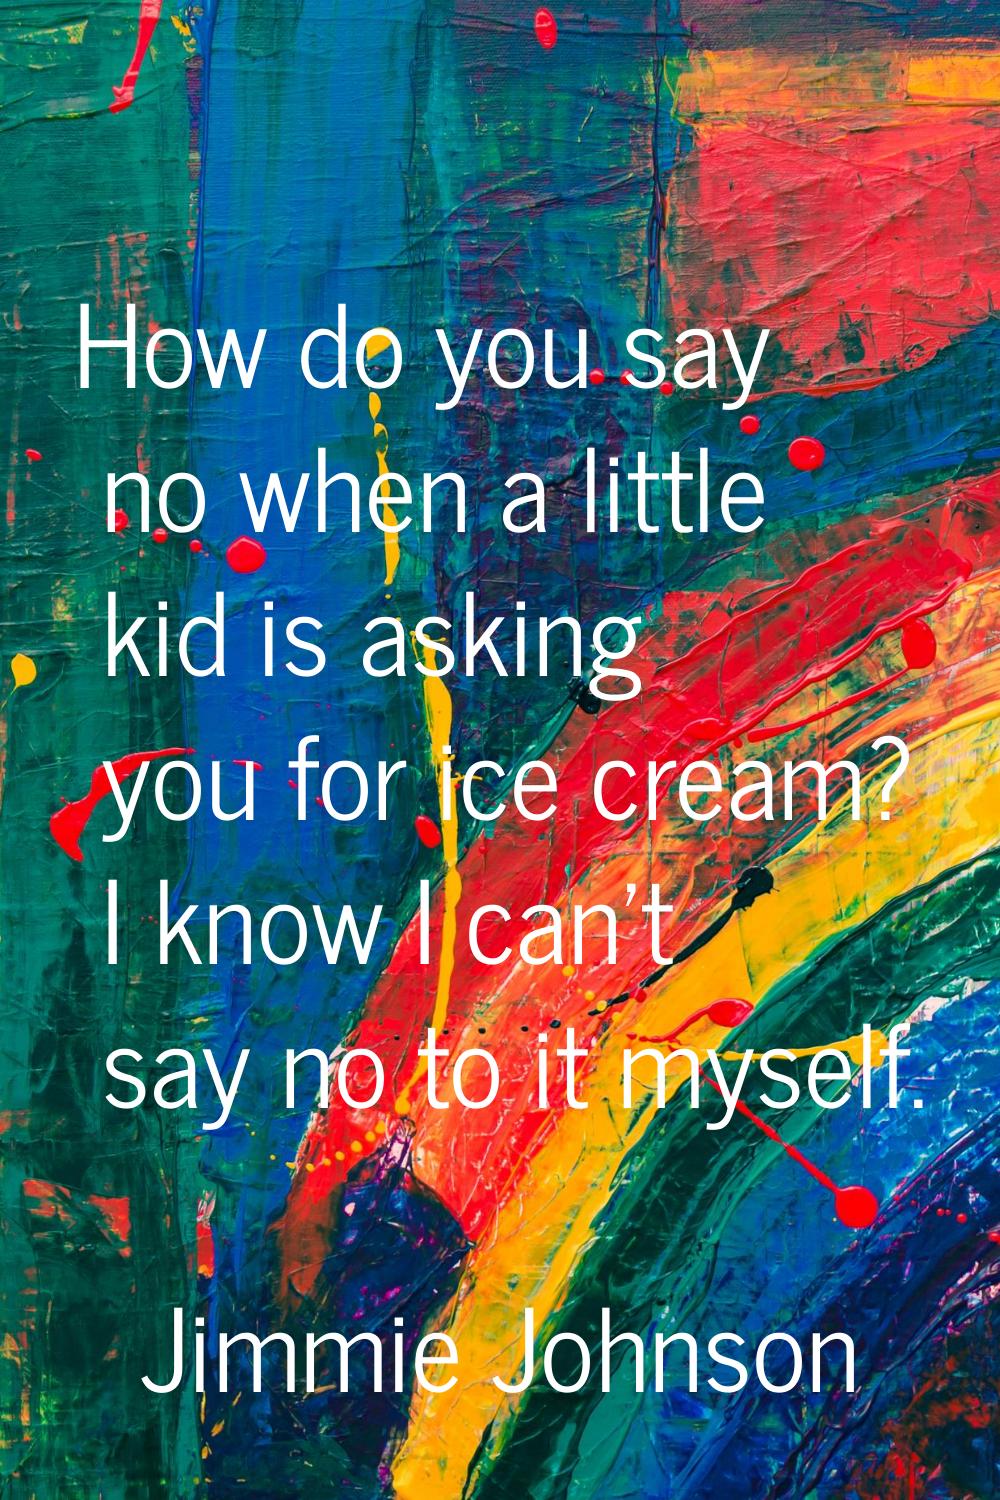 How do you say no when a little kid is asking you for ice cream? I know I can't say no to it myself